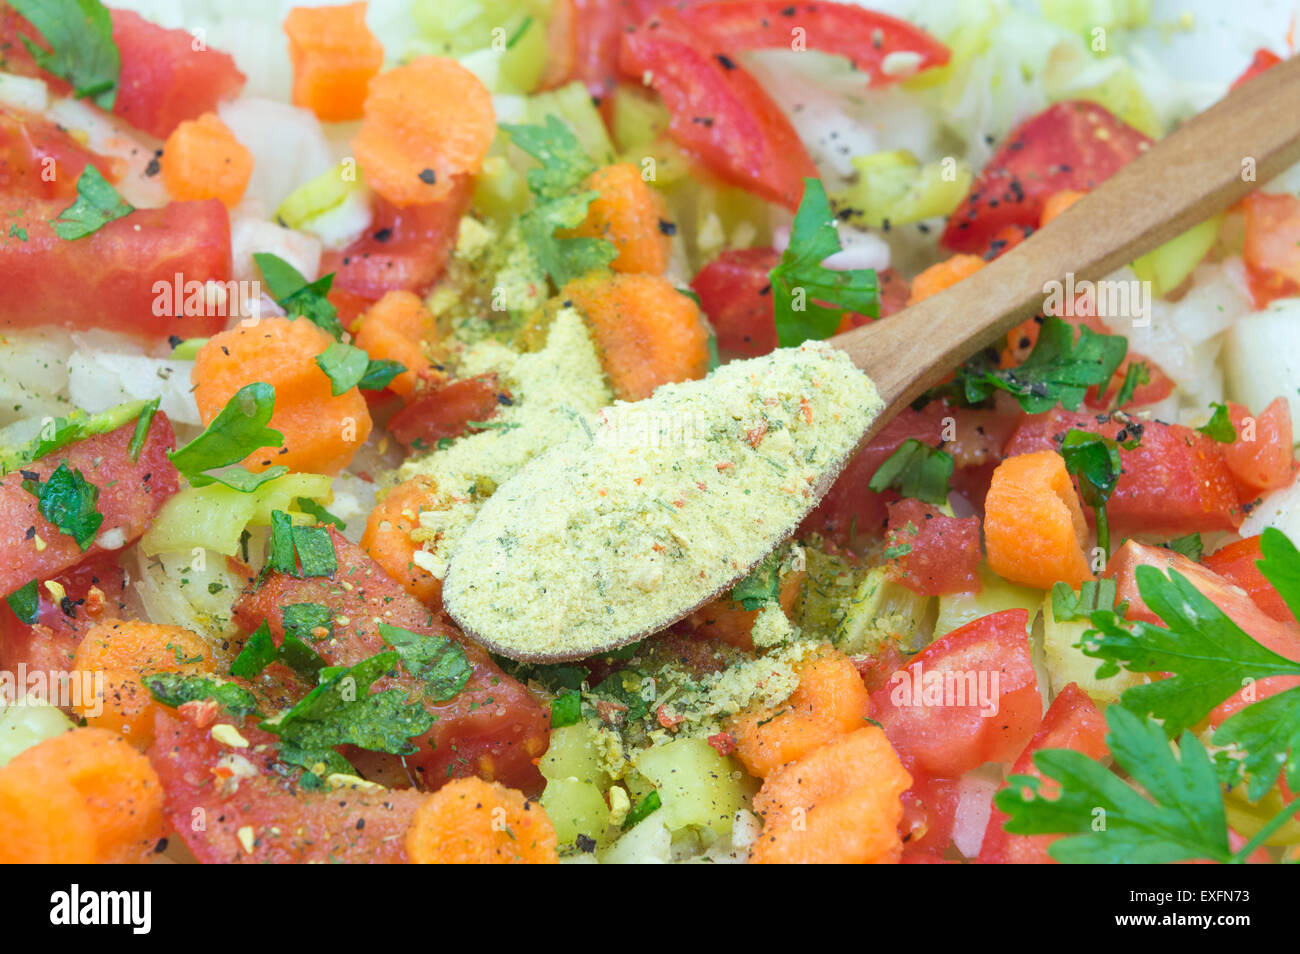 Seasoning in a wooden spoon on top of the vegetable salad with tomato,cucumber,parsley,carrot,paprika and onions Stock Photo